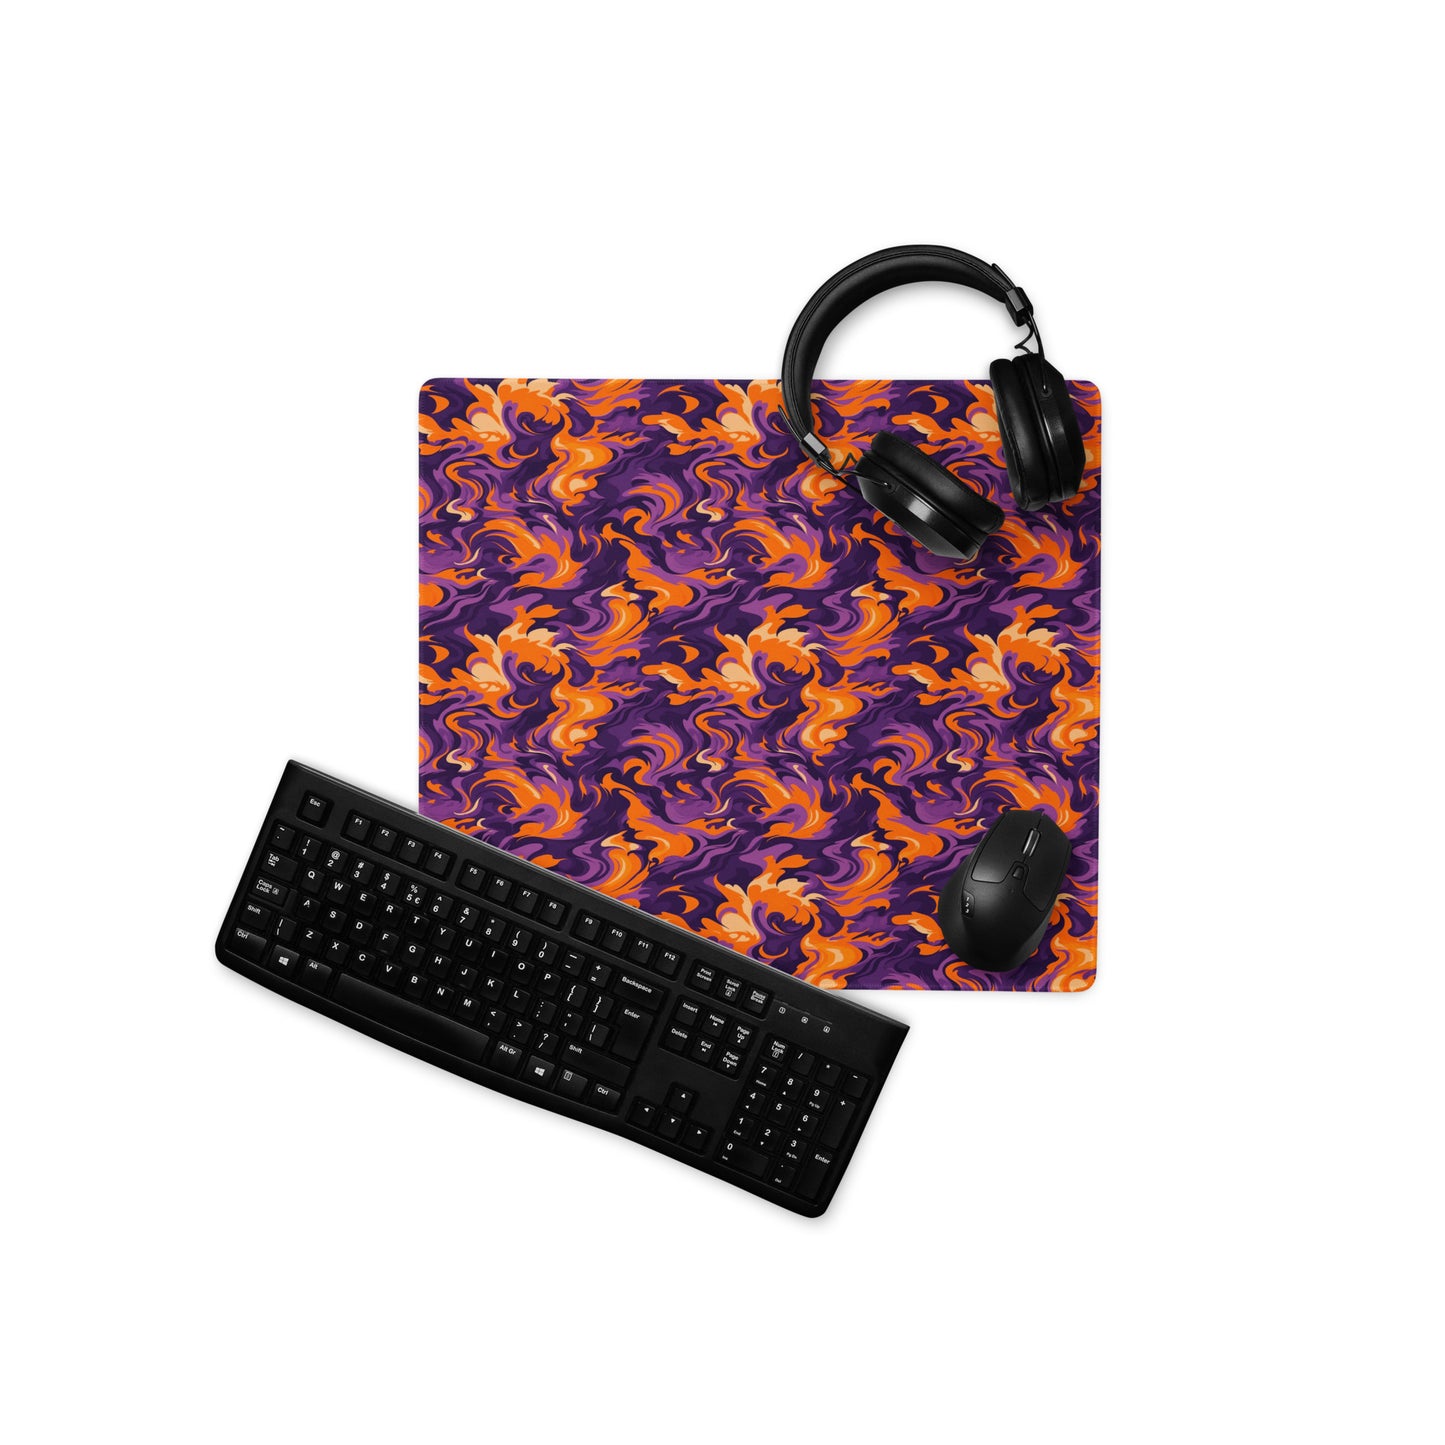 A 18" x 16" desk pad with a purple and orange camo pattern. With a keyboard, mouse, and headphones sitting on it.